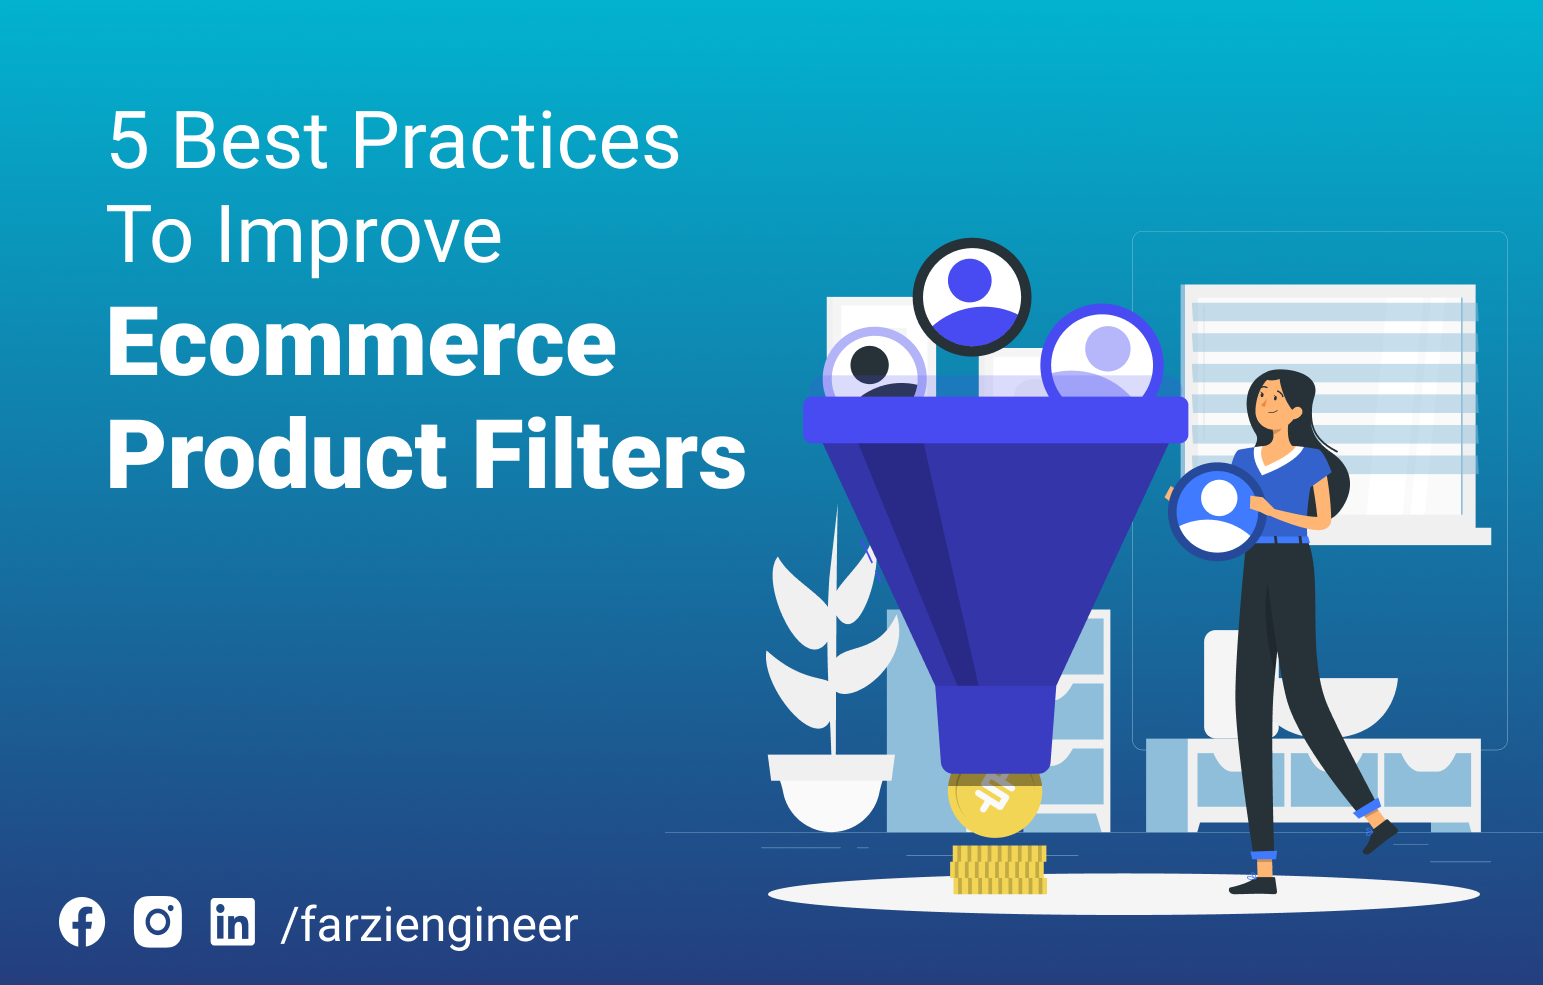 5 Best Practices To Improve Ecommerce Product Filters